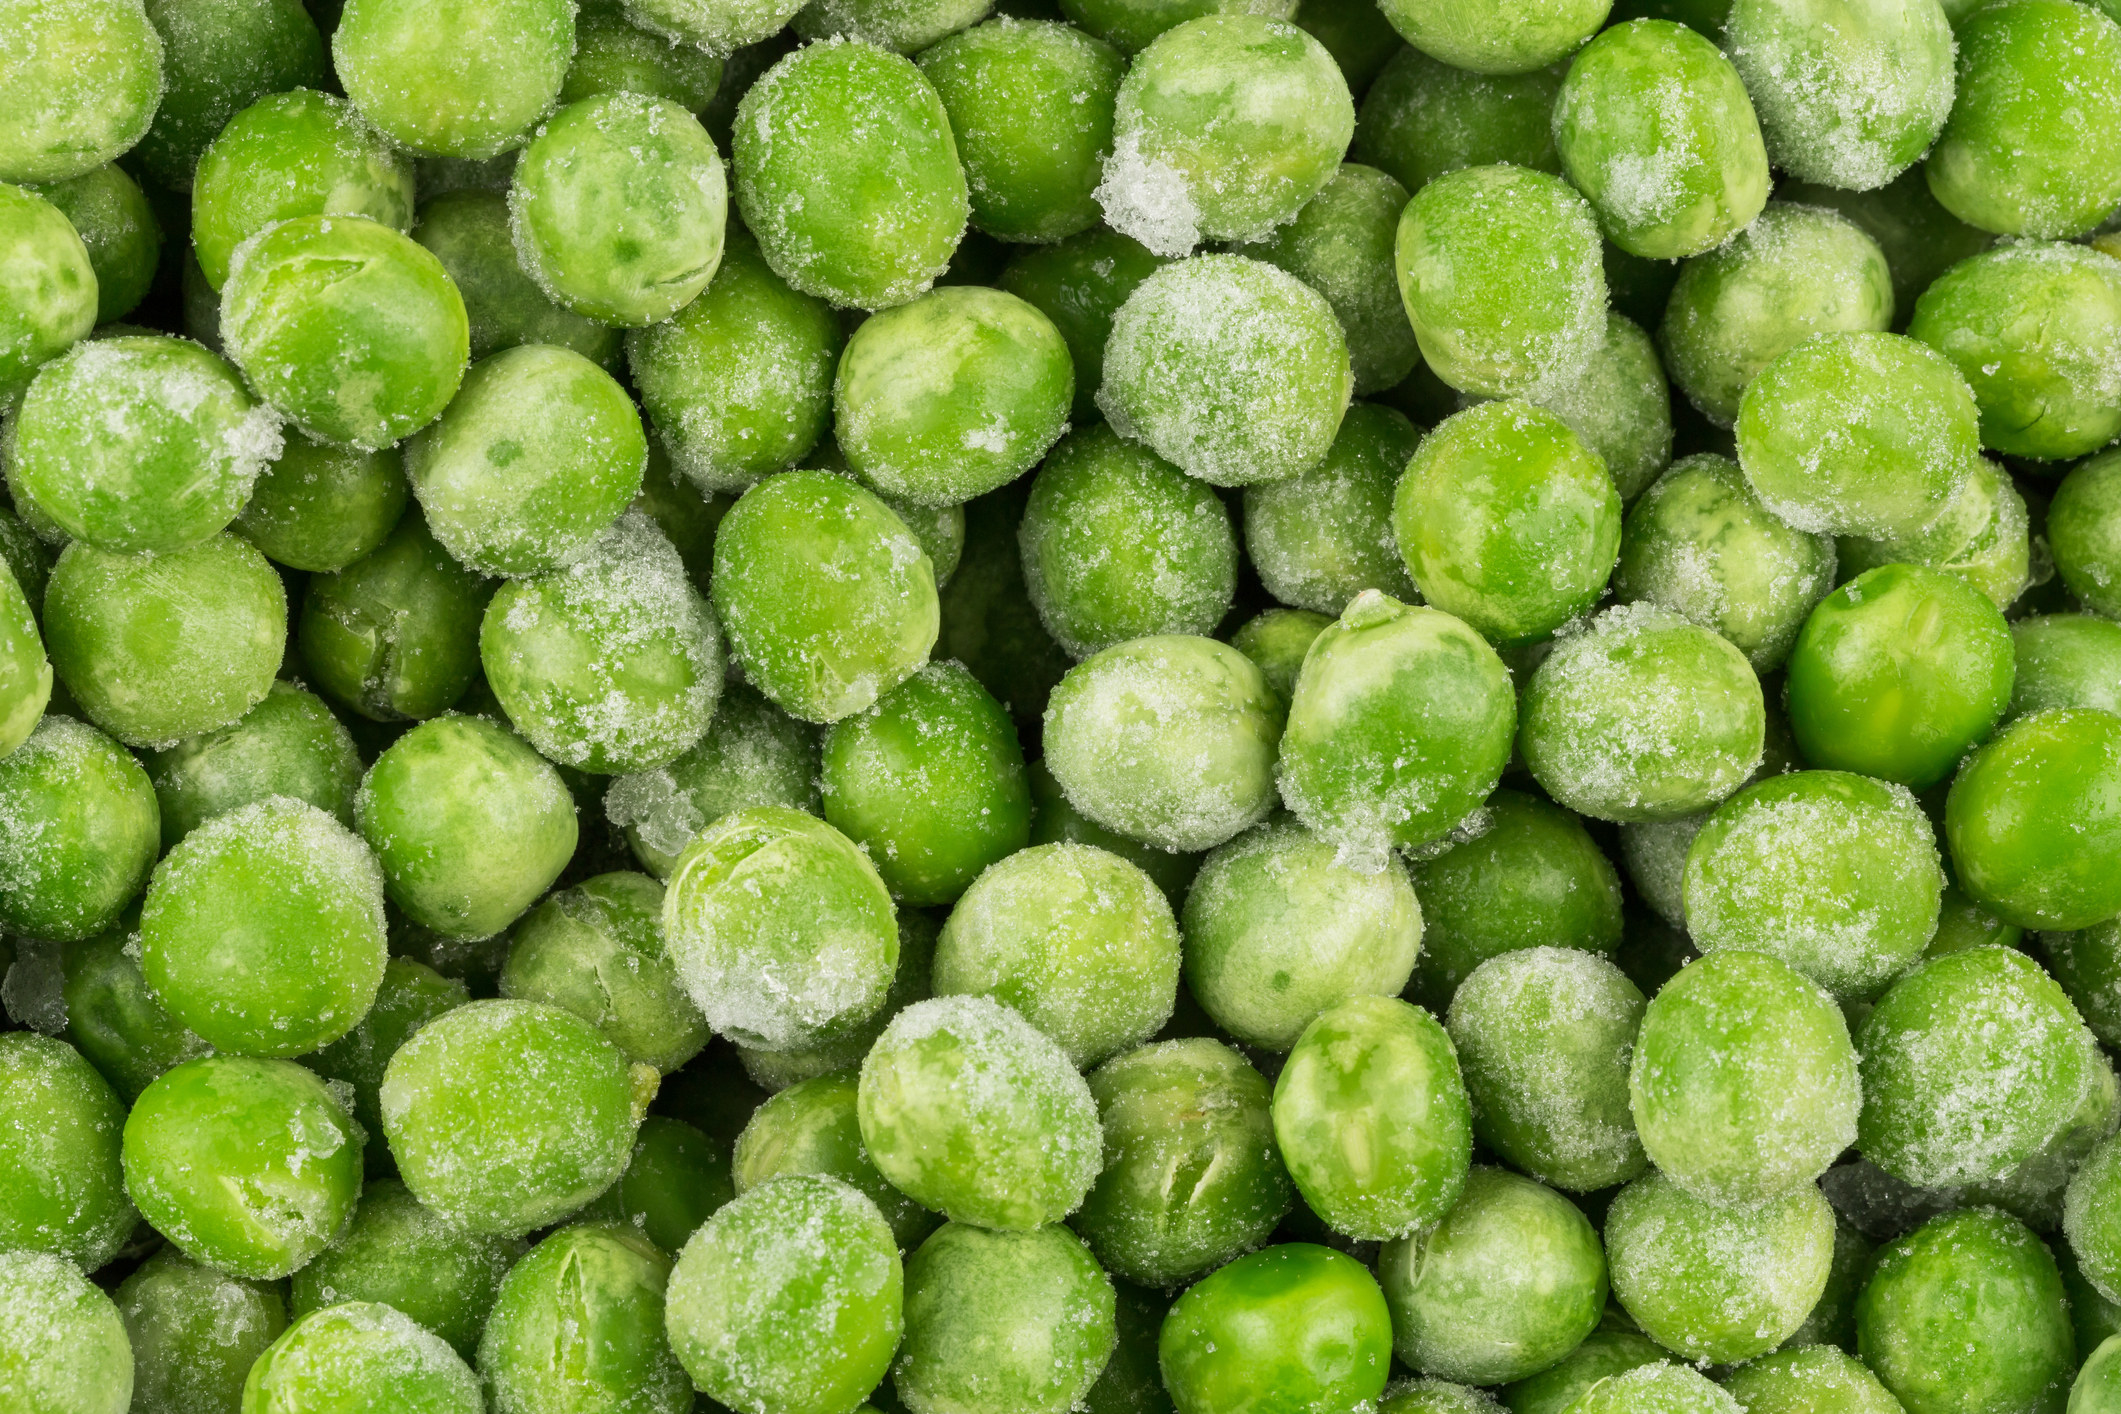 Frozen peas packed together